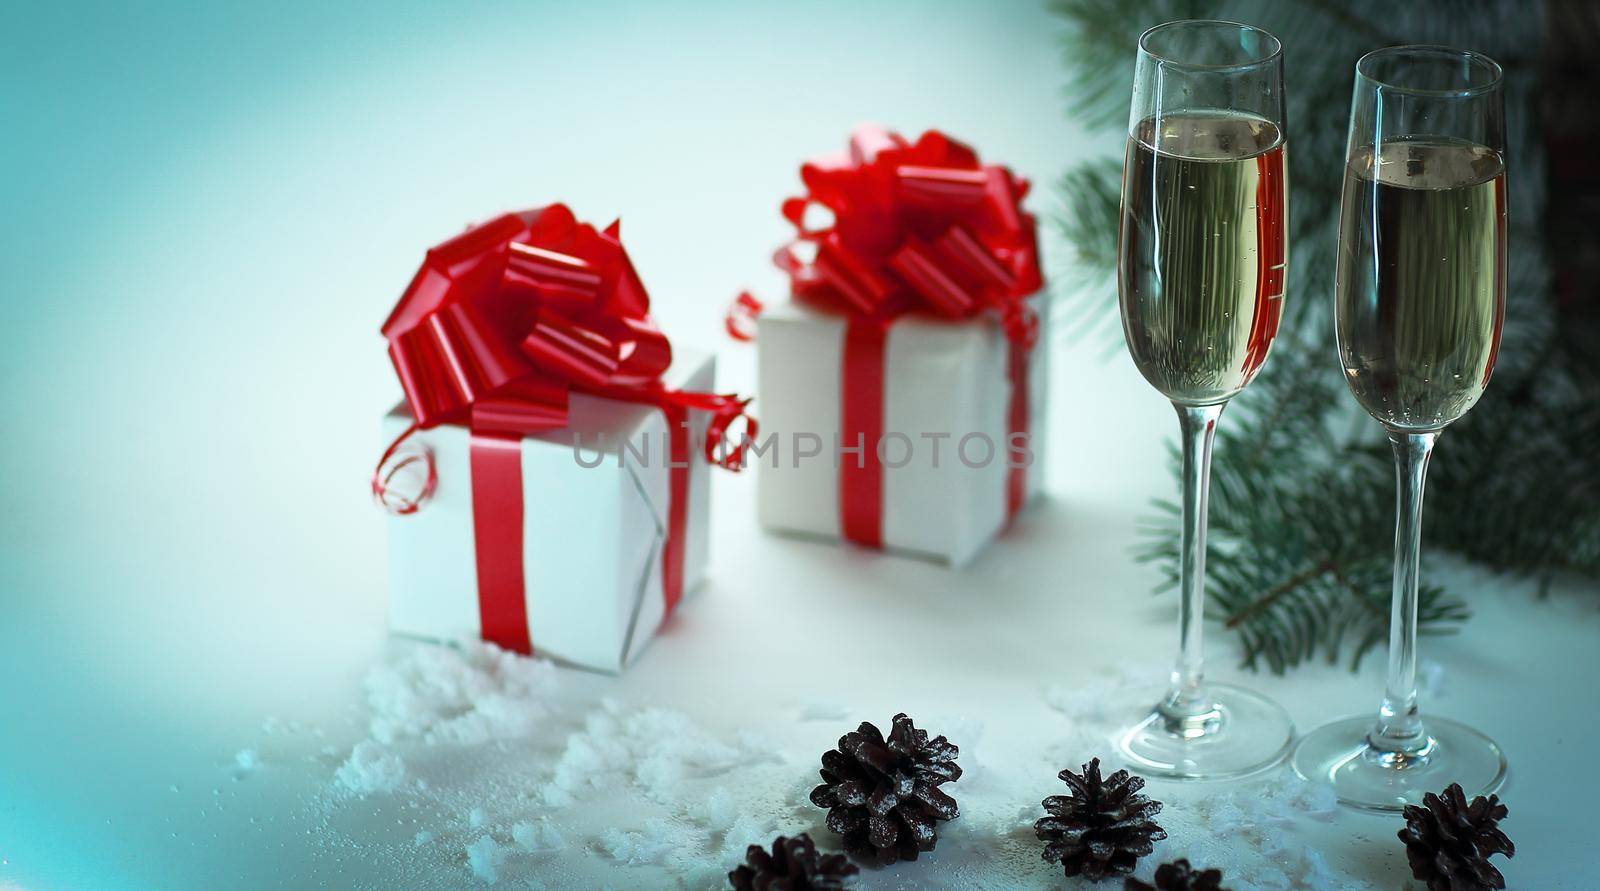 two glasses with champagne and Christmas gifts at the Christmas background .photo with copy space.